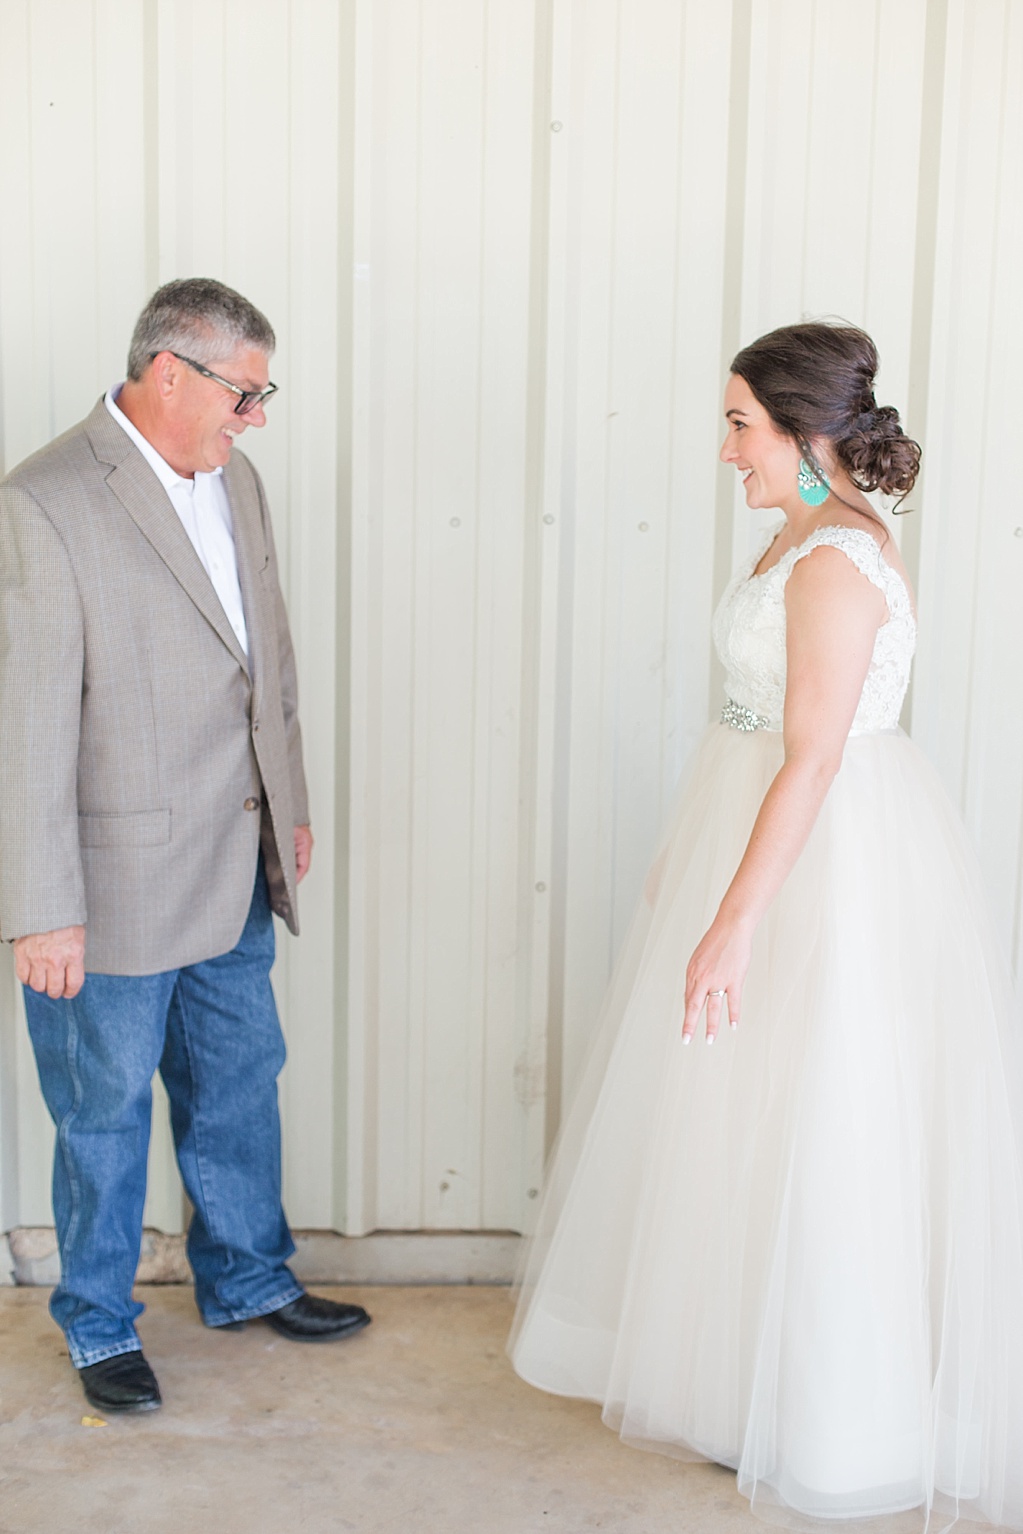 A labor day weekend wedding at Criders dance hall in Hunt Texas by Allison Jeffers 0005